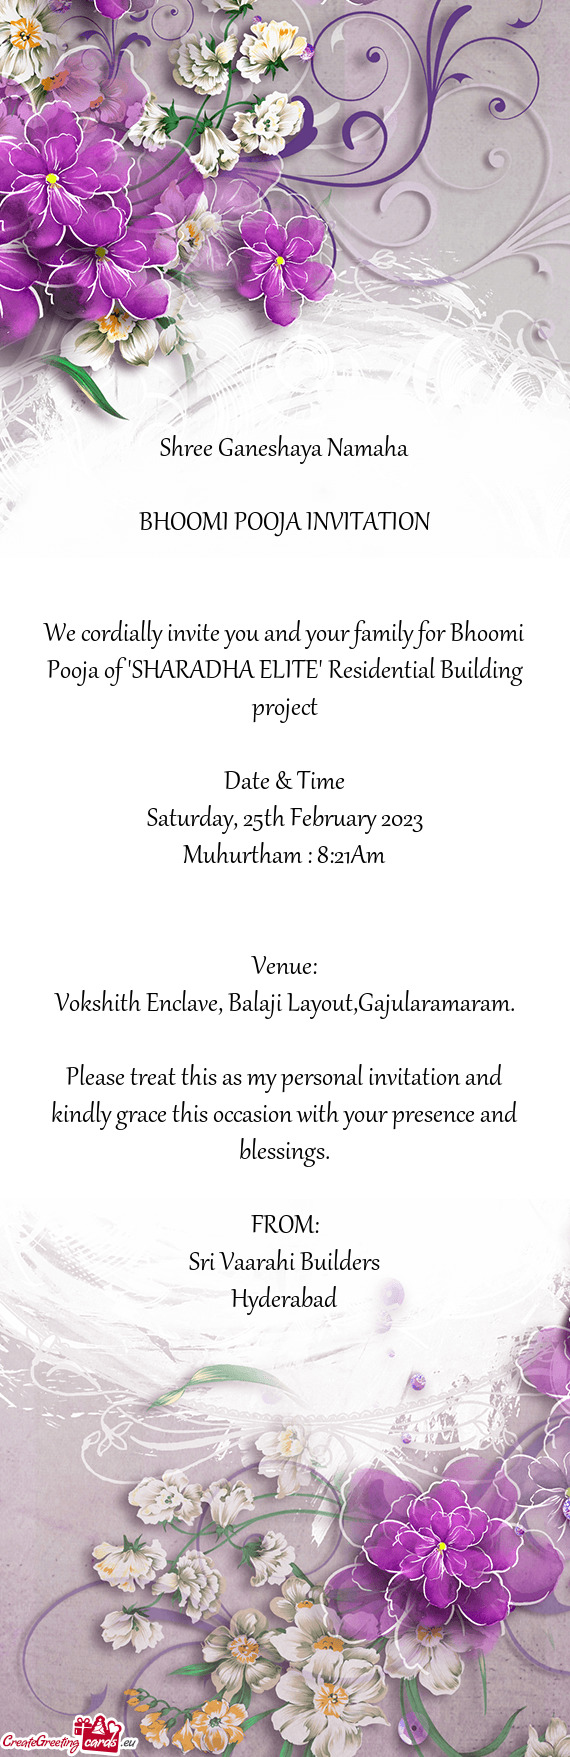 We cordially invite you and your family for Bhoomi Pooja of "SHARADHA ELITE" Residential Building pr